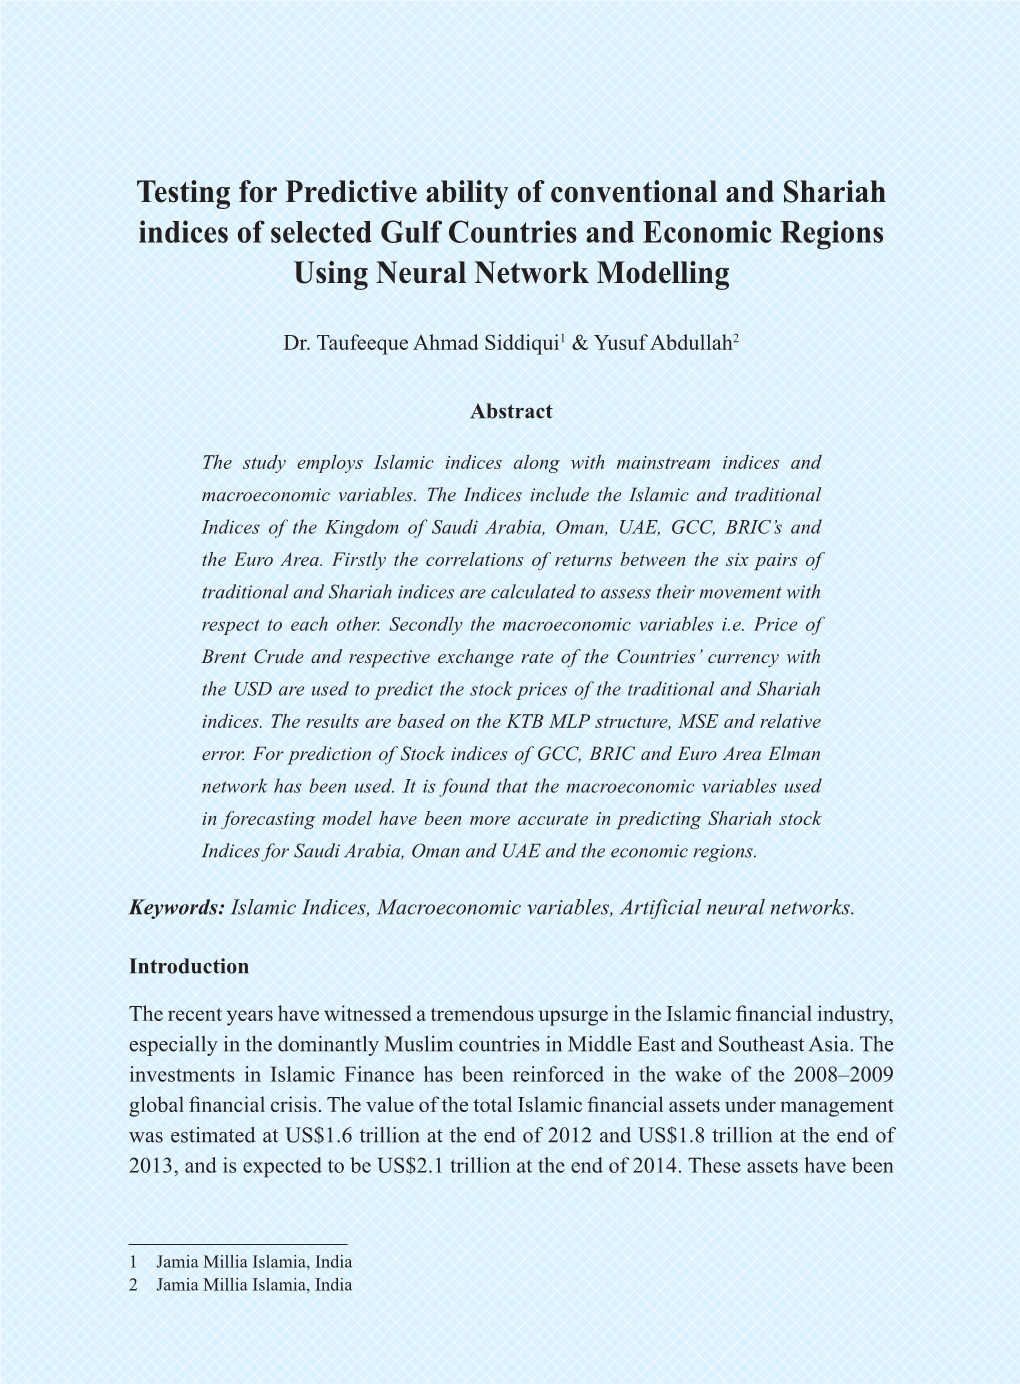 Testing for Predictive Ability of Conventional and Shariah Indices of Selected Gulf Countries and Economic Regions Using Neural Network Modelling